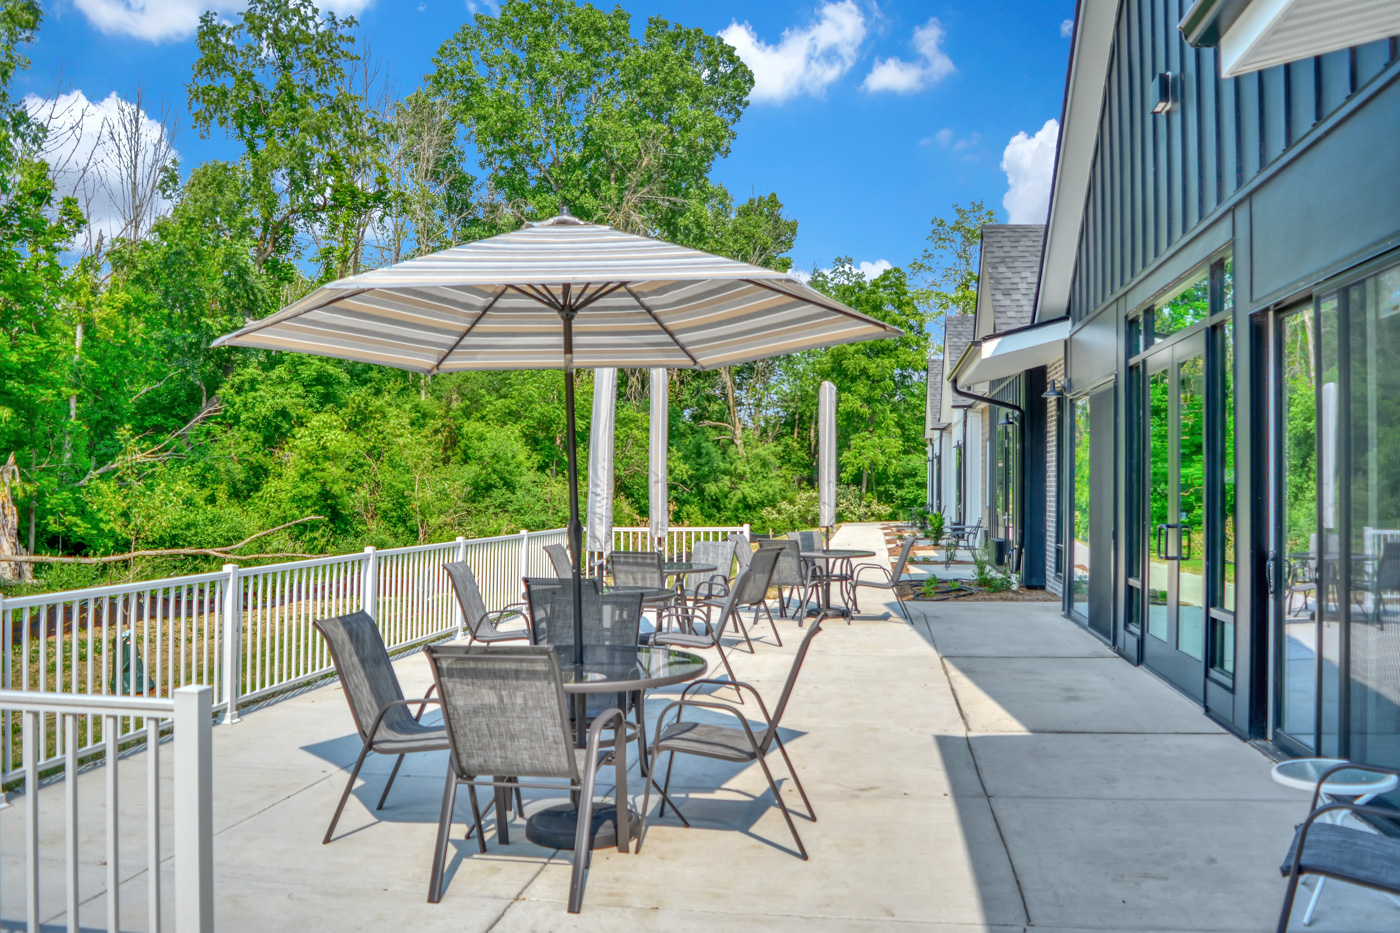 The Woods - Assisted Living - Patio